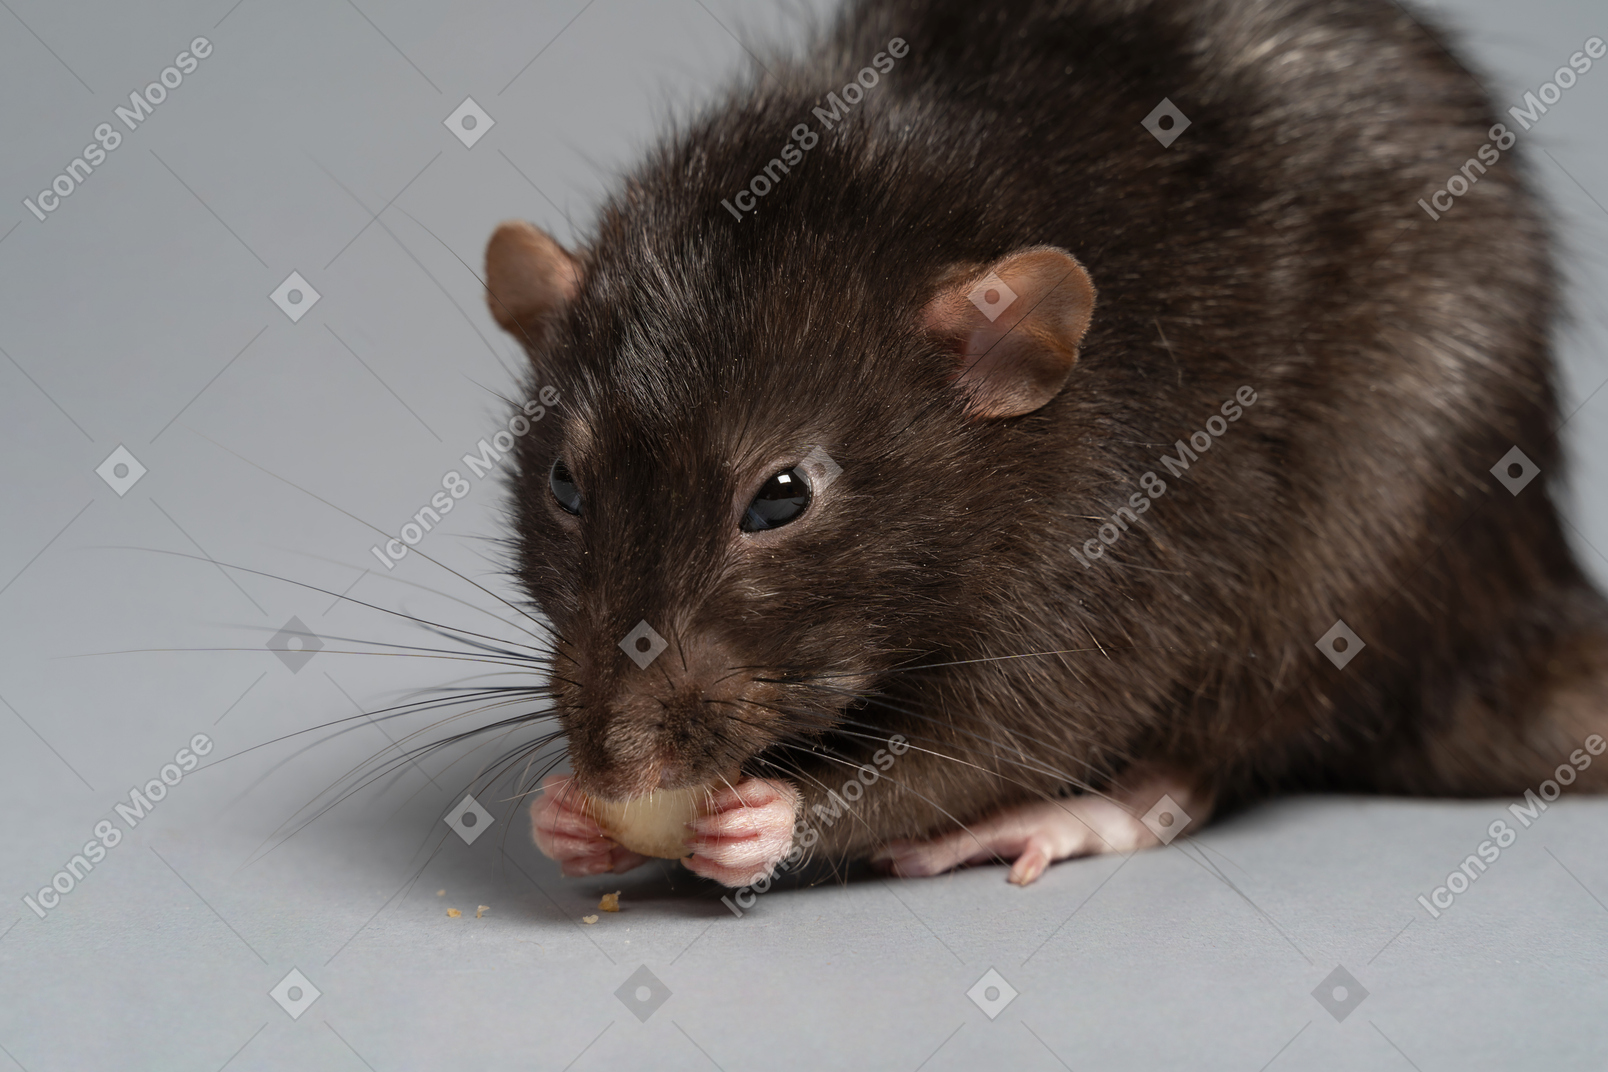 A nice fluffy pet rat crunching some food